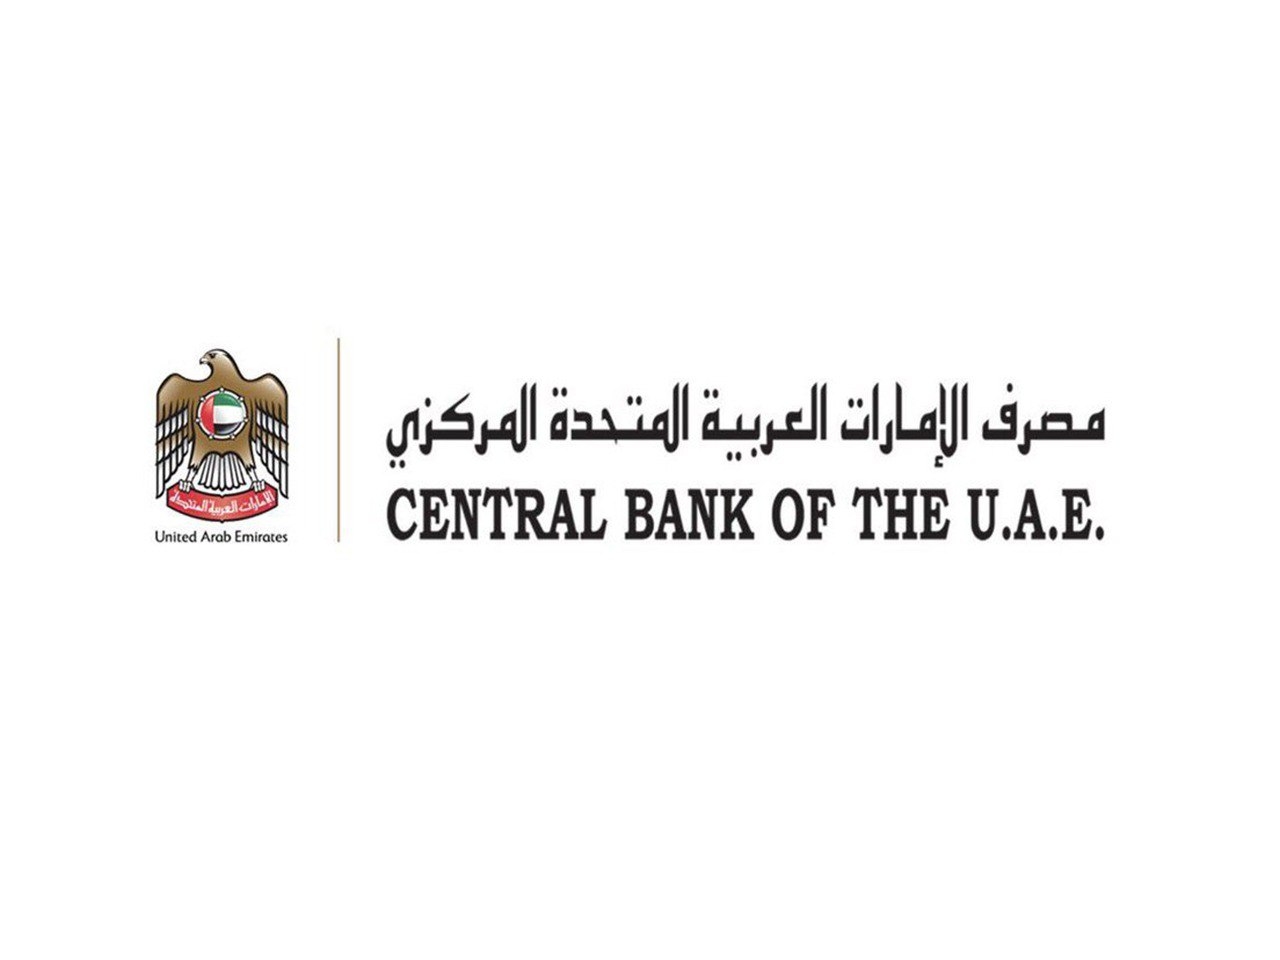 Central Bank of the U.A.E